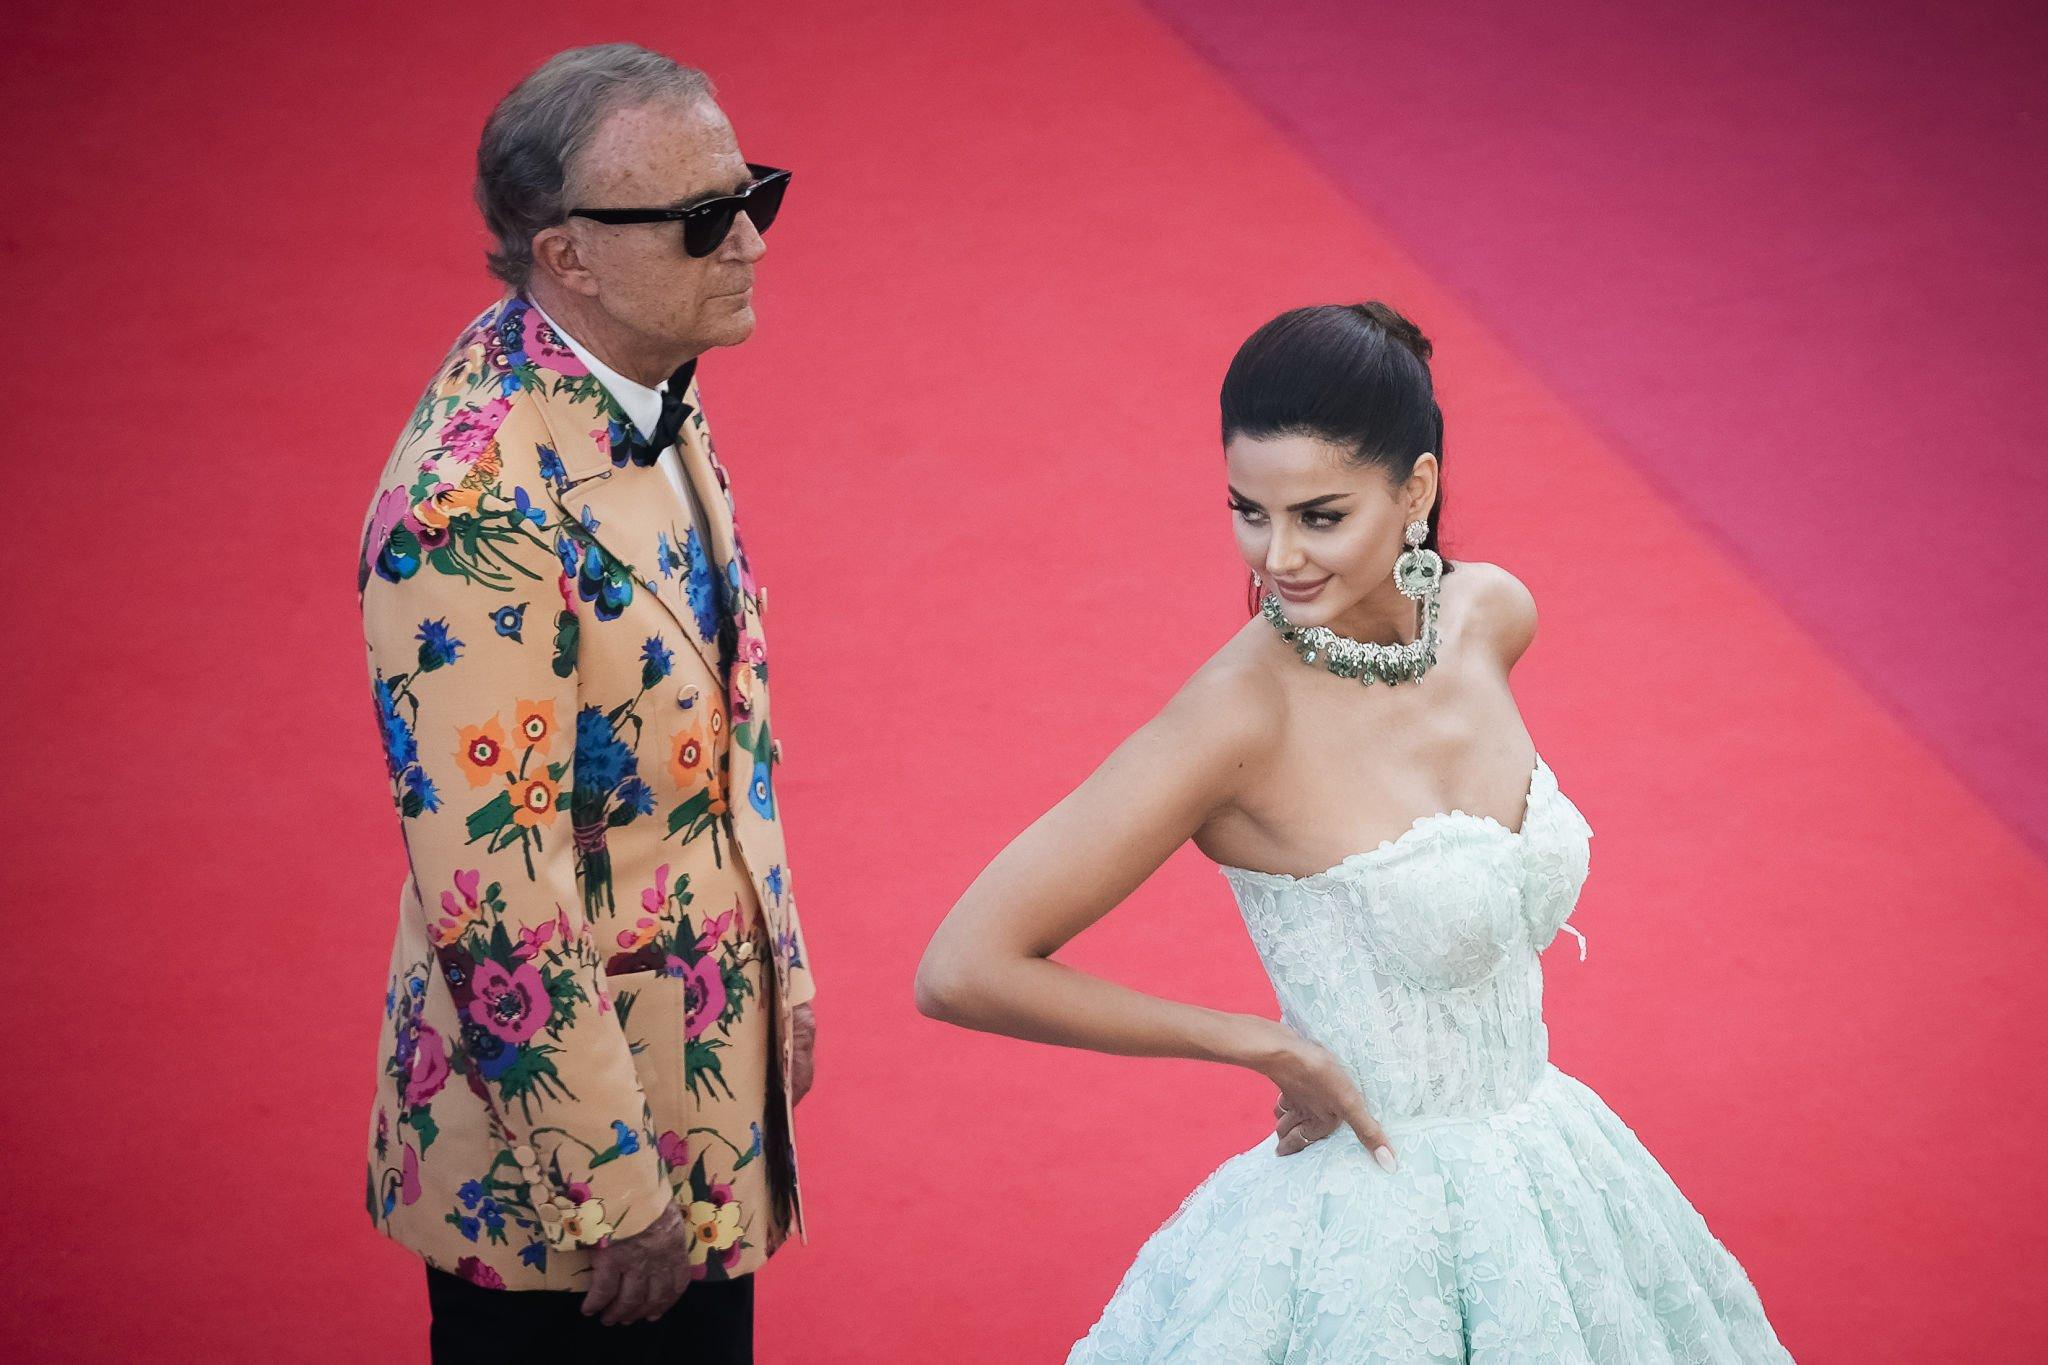 Mahlagha Jaberi at the premiere of "Tre Piani" during the Cannes Film Festival 